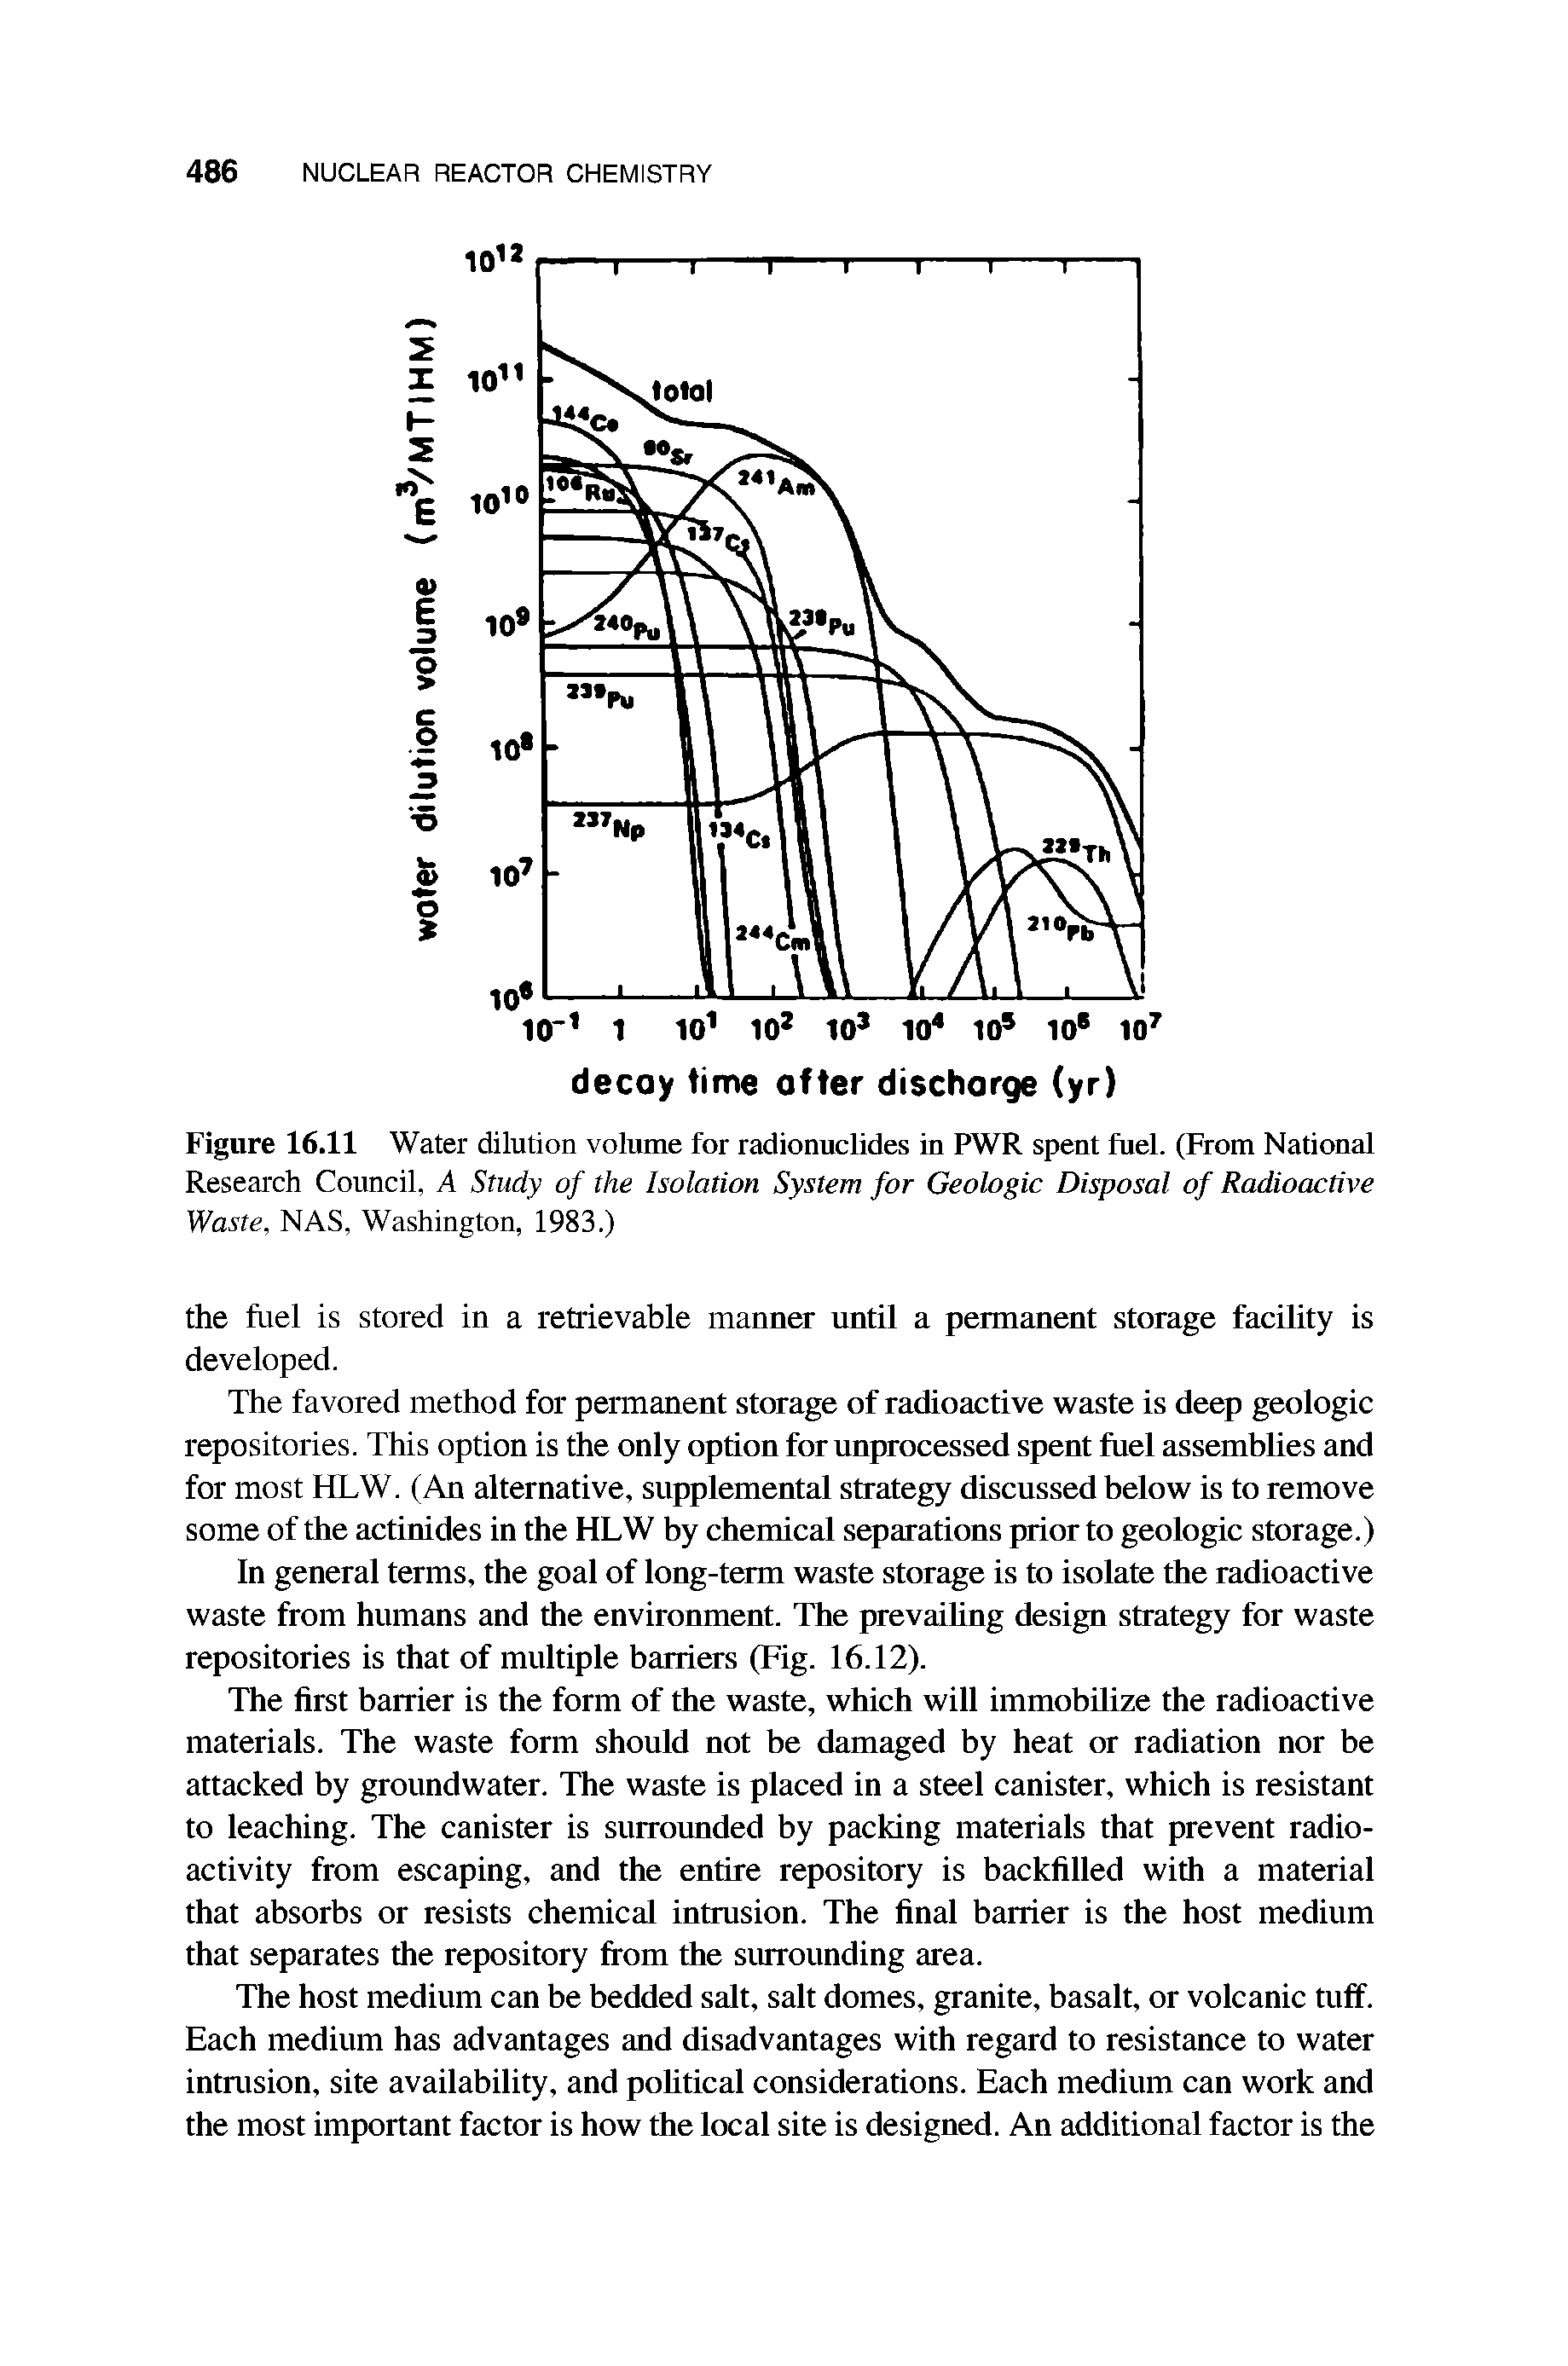 Figure 16.11 Water dilution volume for radionuclides in PWR spent fuel. (From National Research Council, A Study of the Isolation System for Geologic Disposal of Radioactive Waste, NAS, Washington, 1983.)...